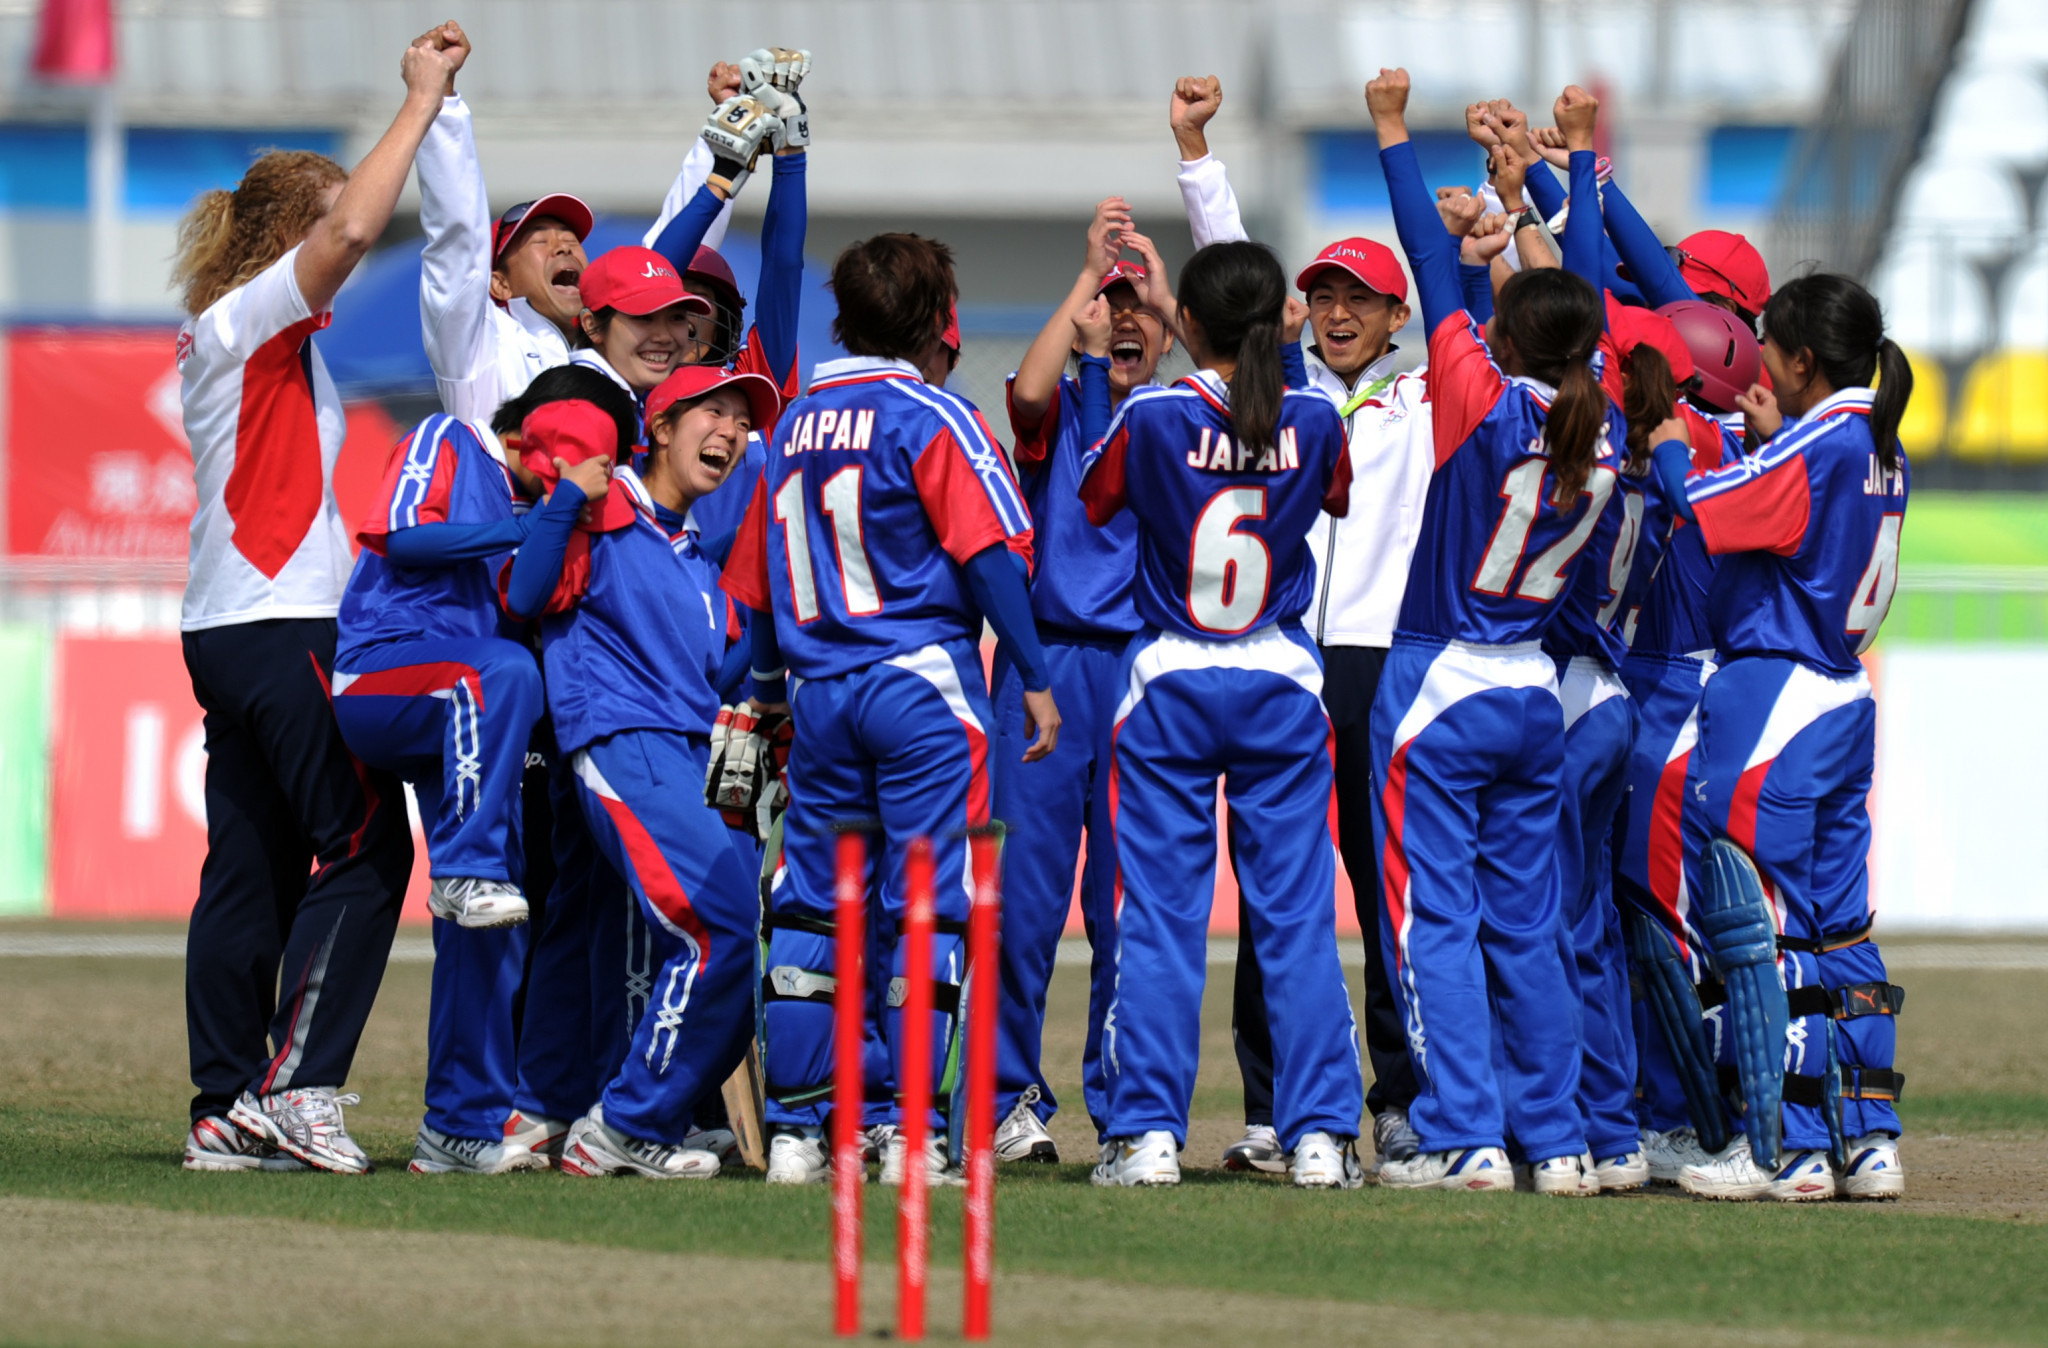 Japanese Cricket Association pushing for inclusion at 2026 Asian Games